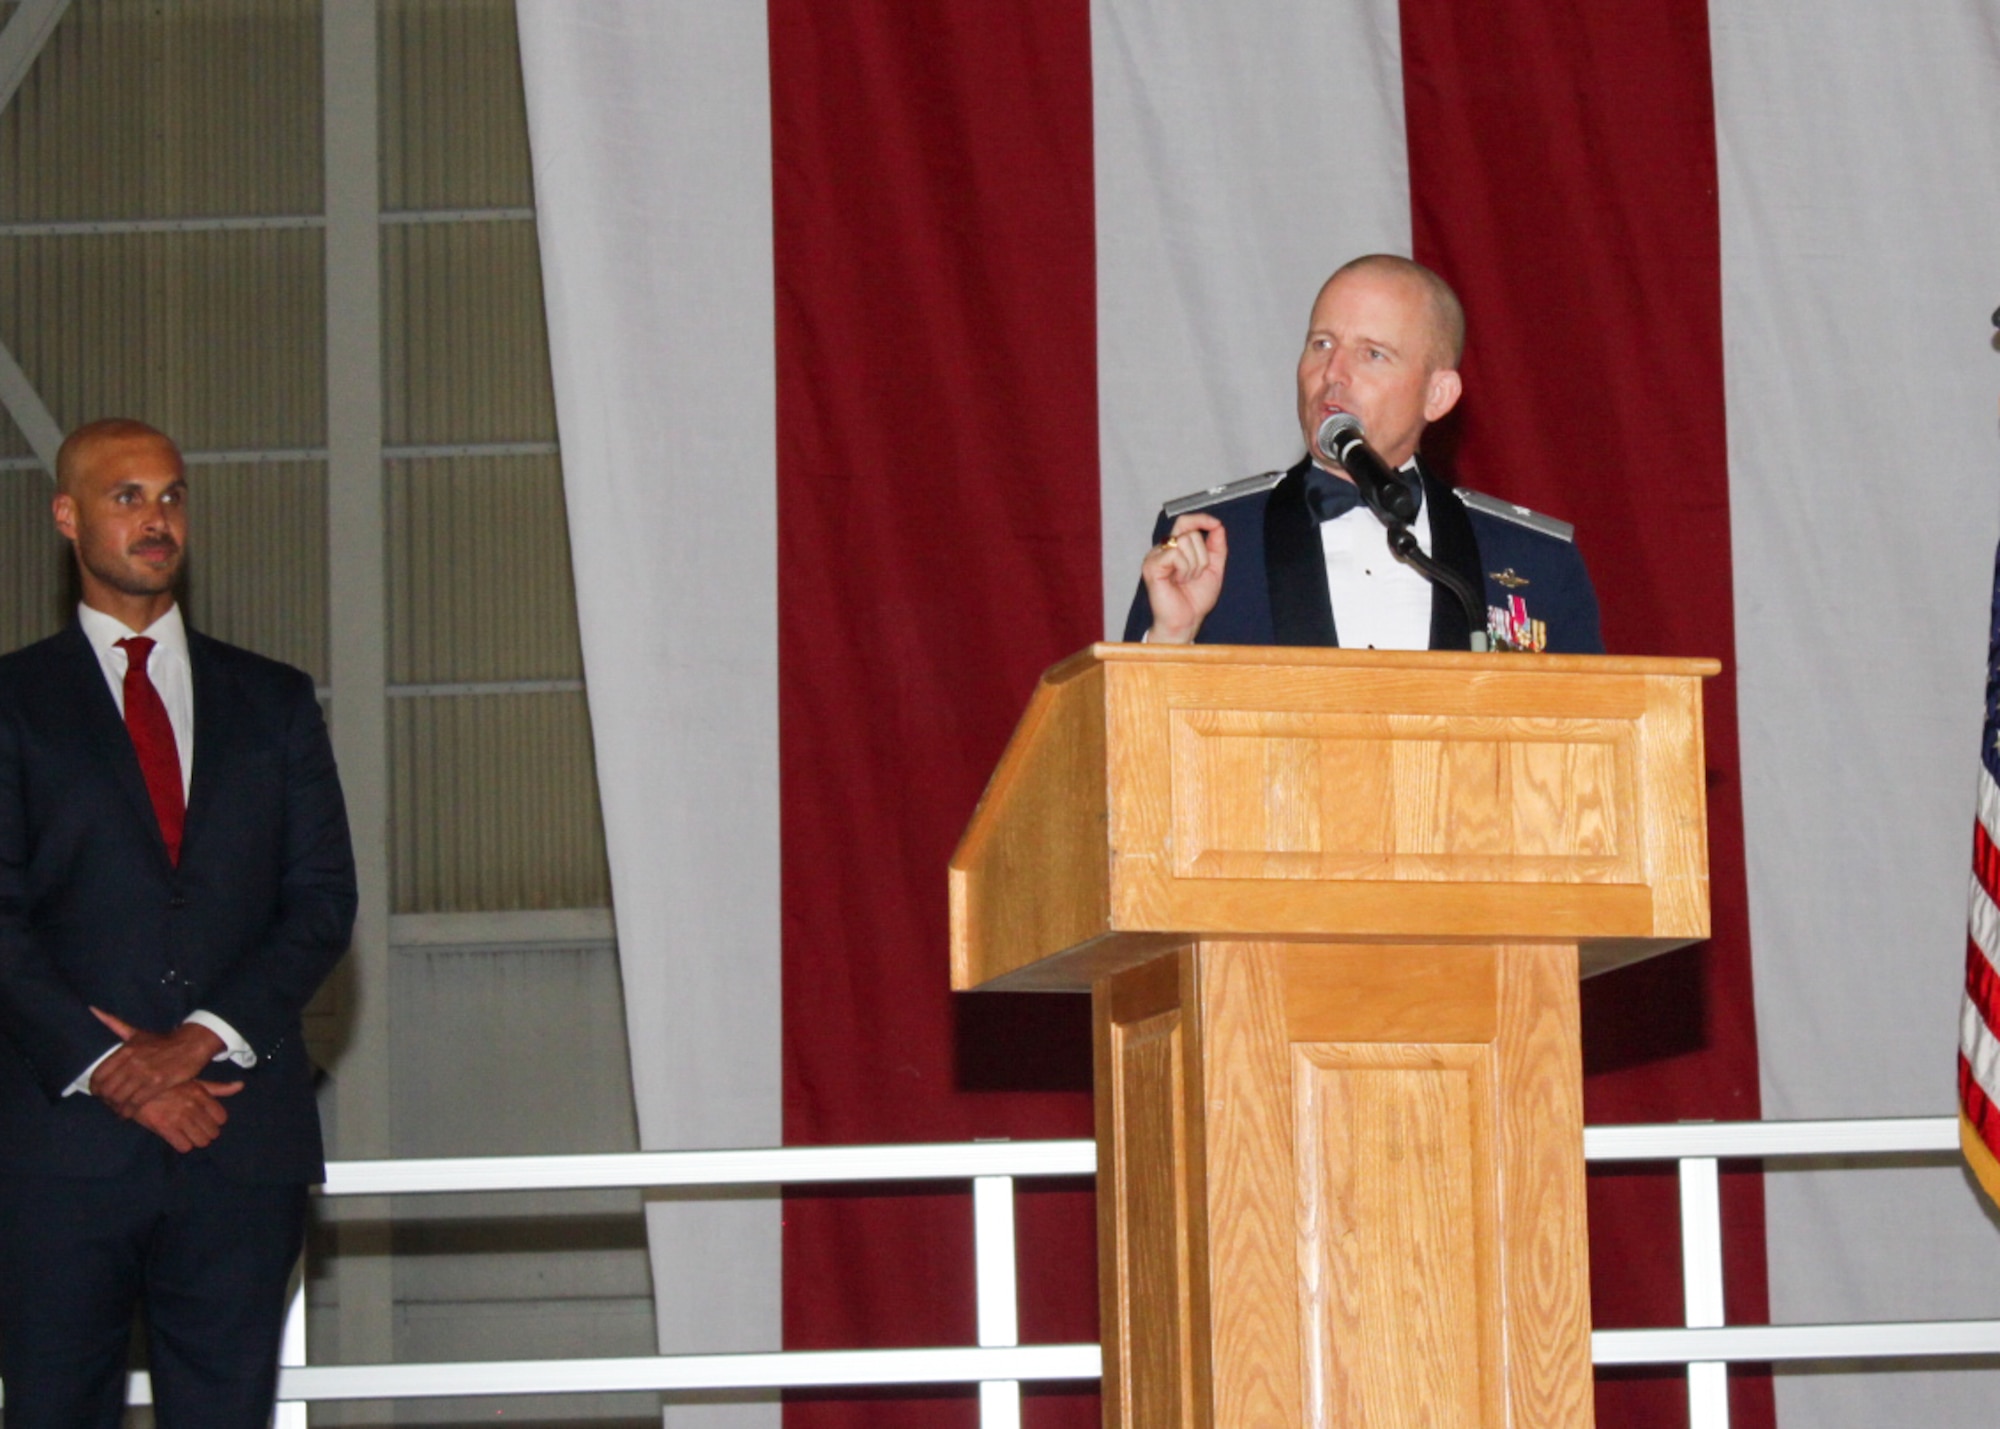 Brig. Gen. Matthew Higer, 412th Test Wing Commander, provides his closing remarks during the 2022 Department of the Air Force Ball at Edwards Air Force Base, California, Sept. 16. (Air Force photo by Laura Maples)